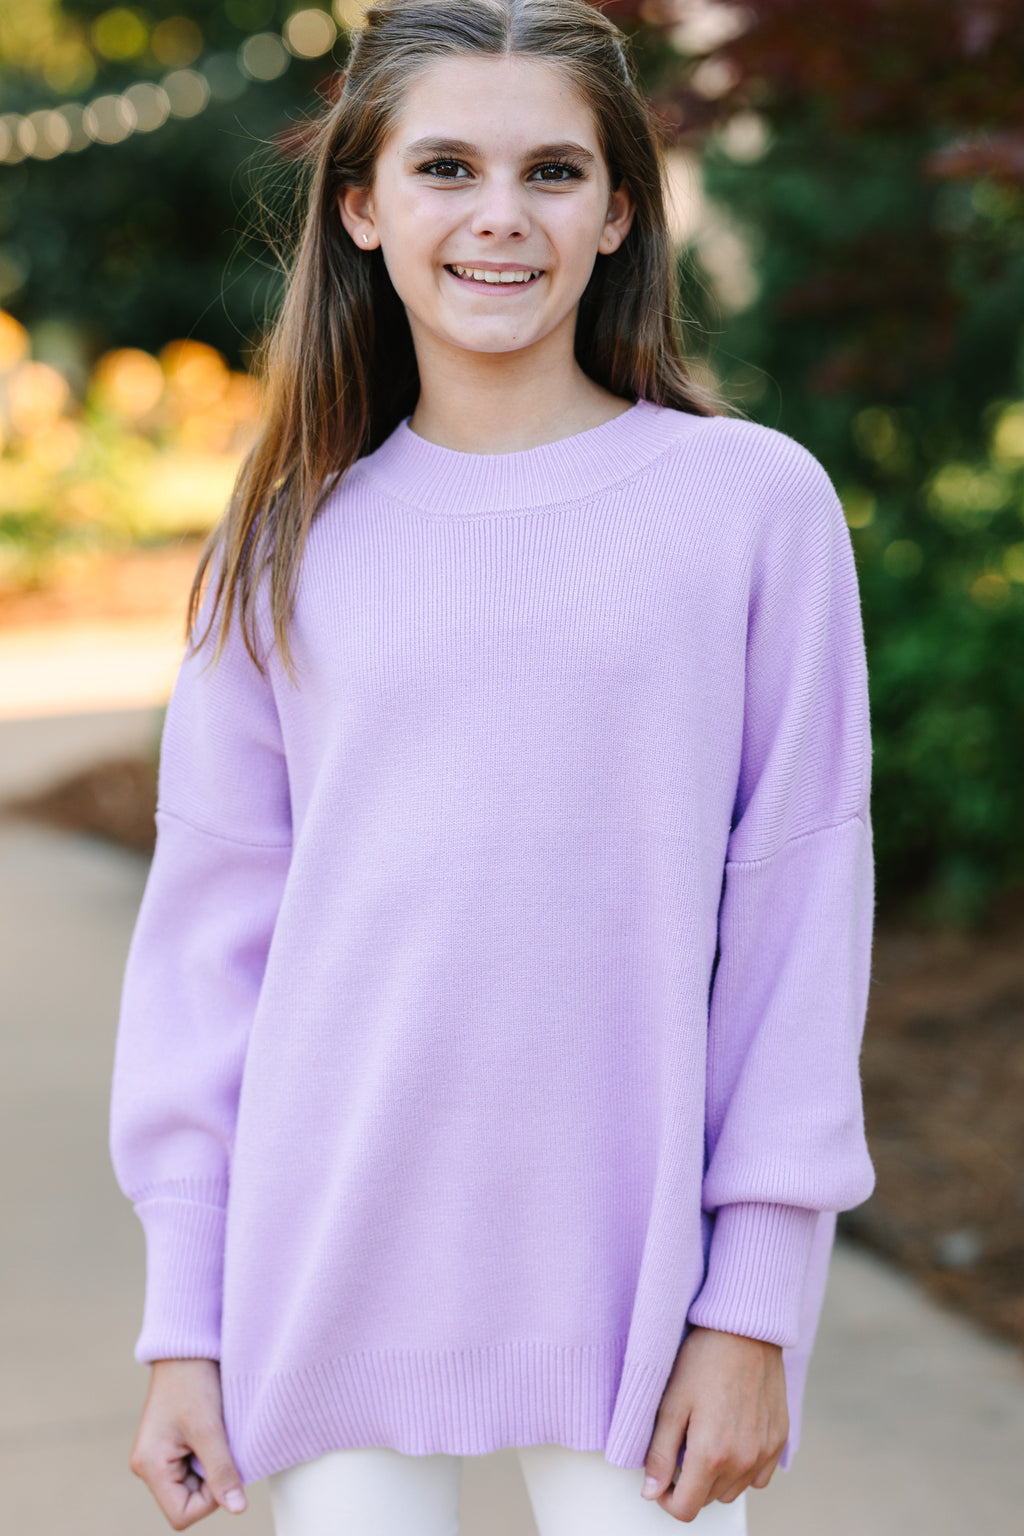 Girls: Perfectly You Lavender Purple Mock Neck Sweater – Shop the Mint